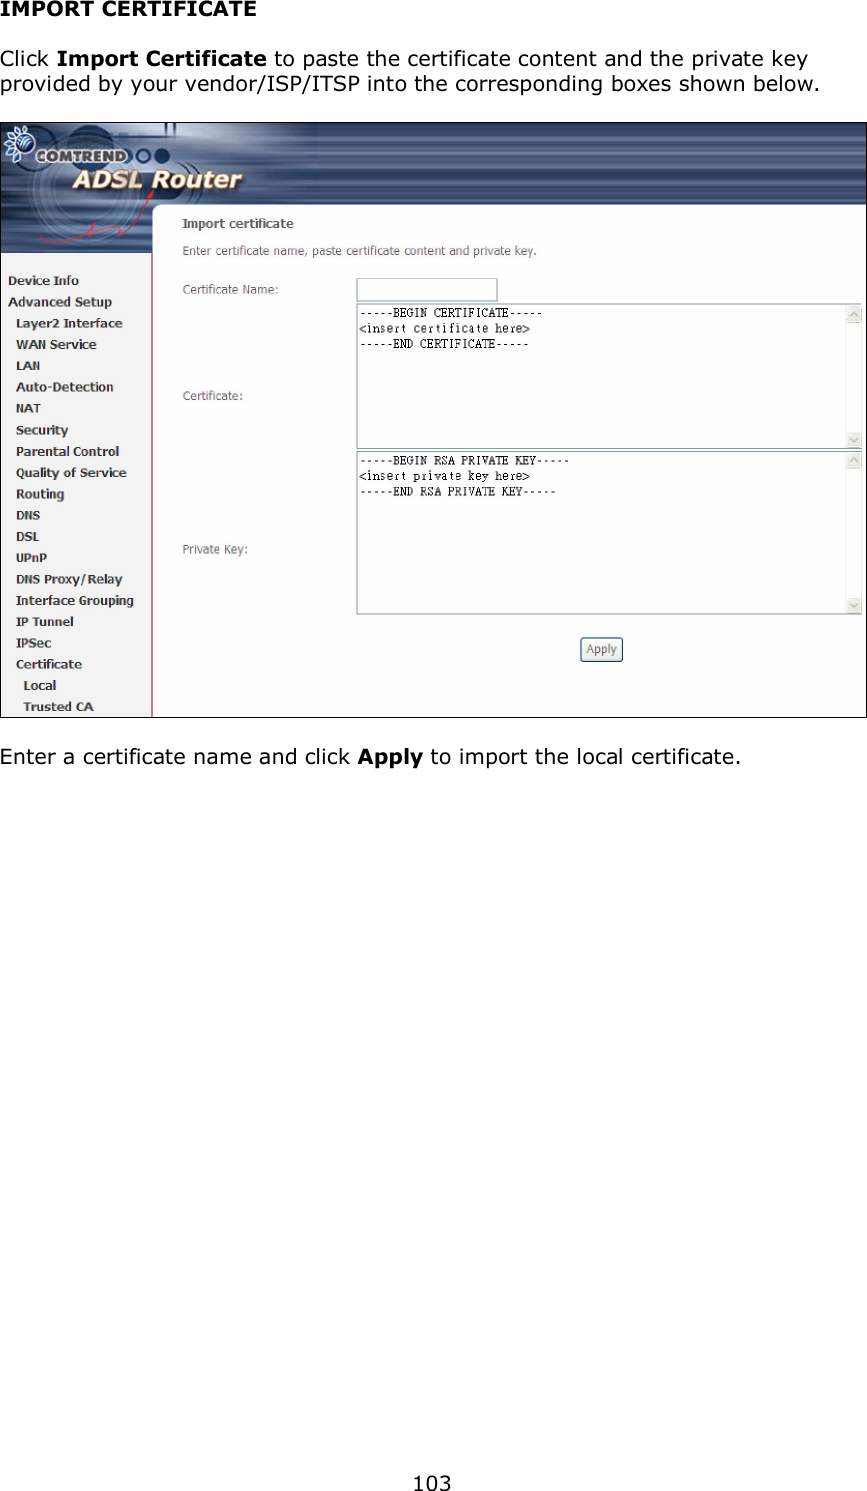  103 IMPORT CERTIFICATE  Click Import Certificate to paste the certificate content and the private key provided by your vendor/ISP/ITSP into the corresponding boxes shown below.    Enter a certificate name and click Apply to import the local certificate. 